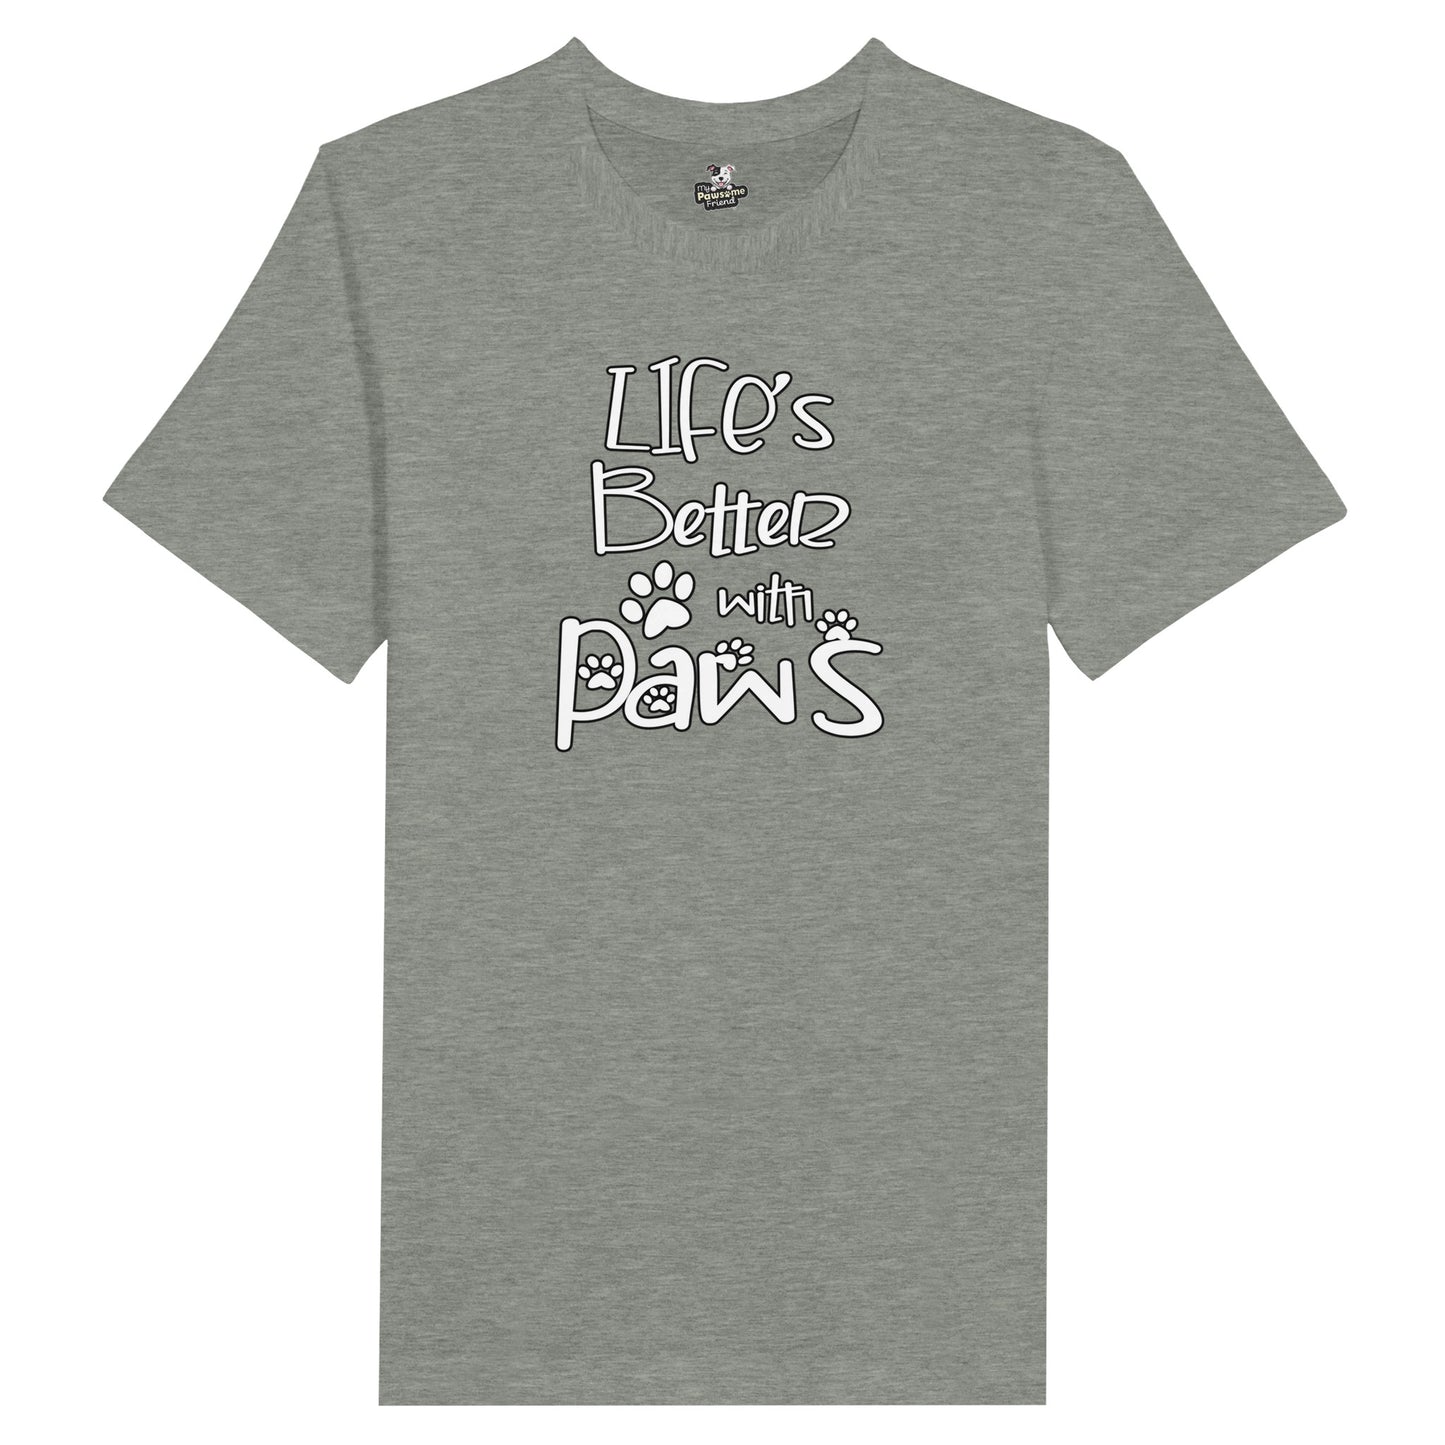 A grey t shirt with the design: "Life's better with paws"